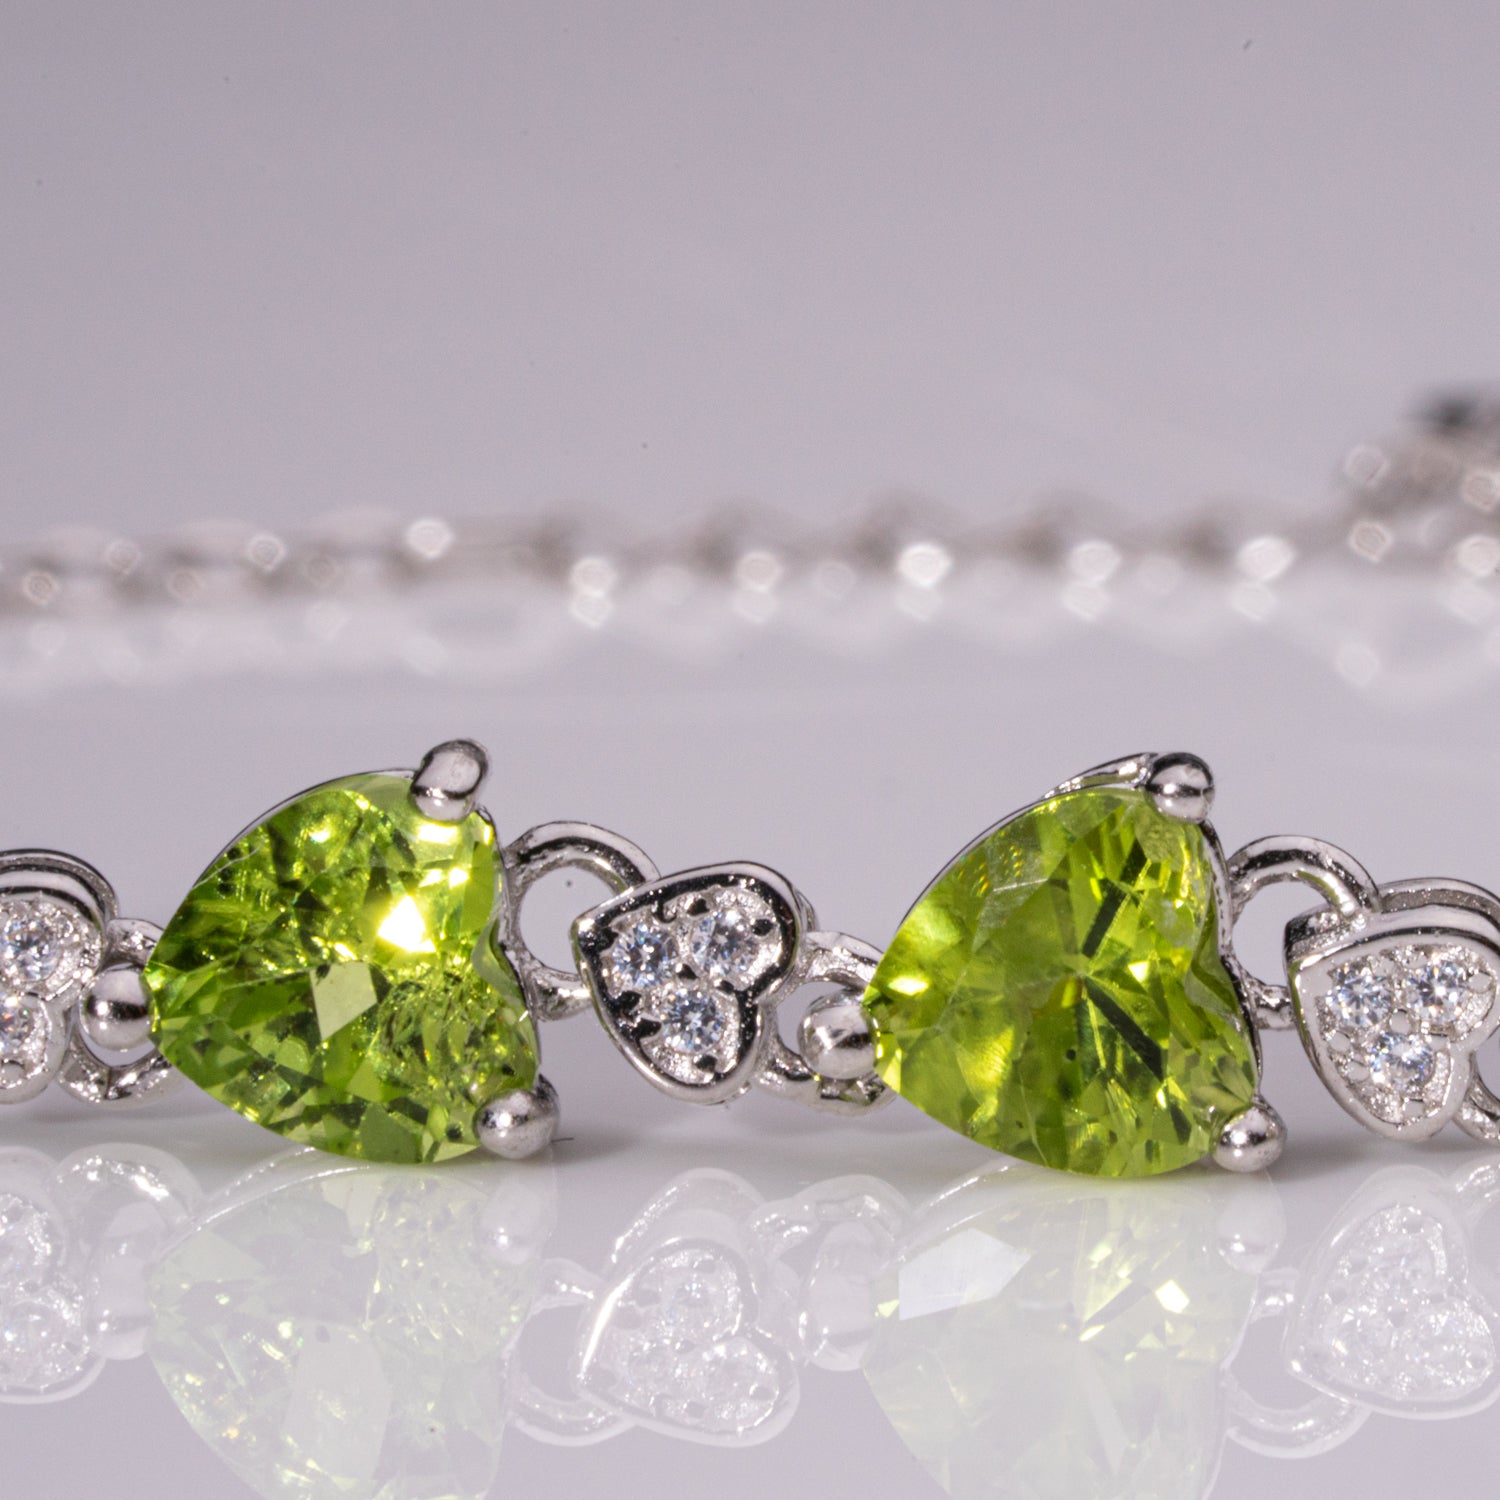 Peridot with Cubic Zirconia Sterling Silver Bracelet (7.5 Inch)